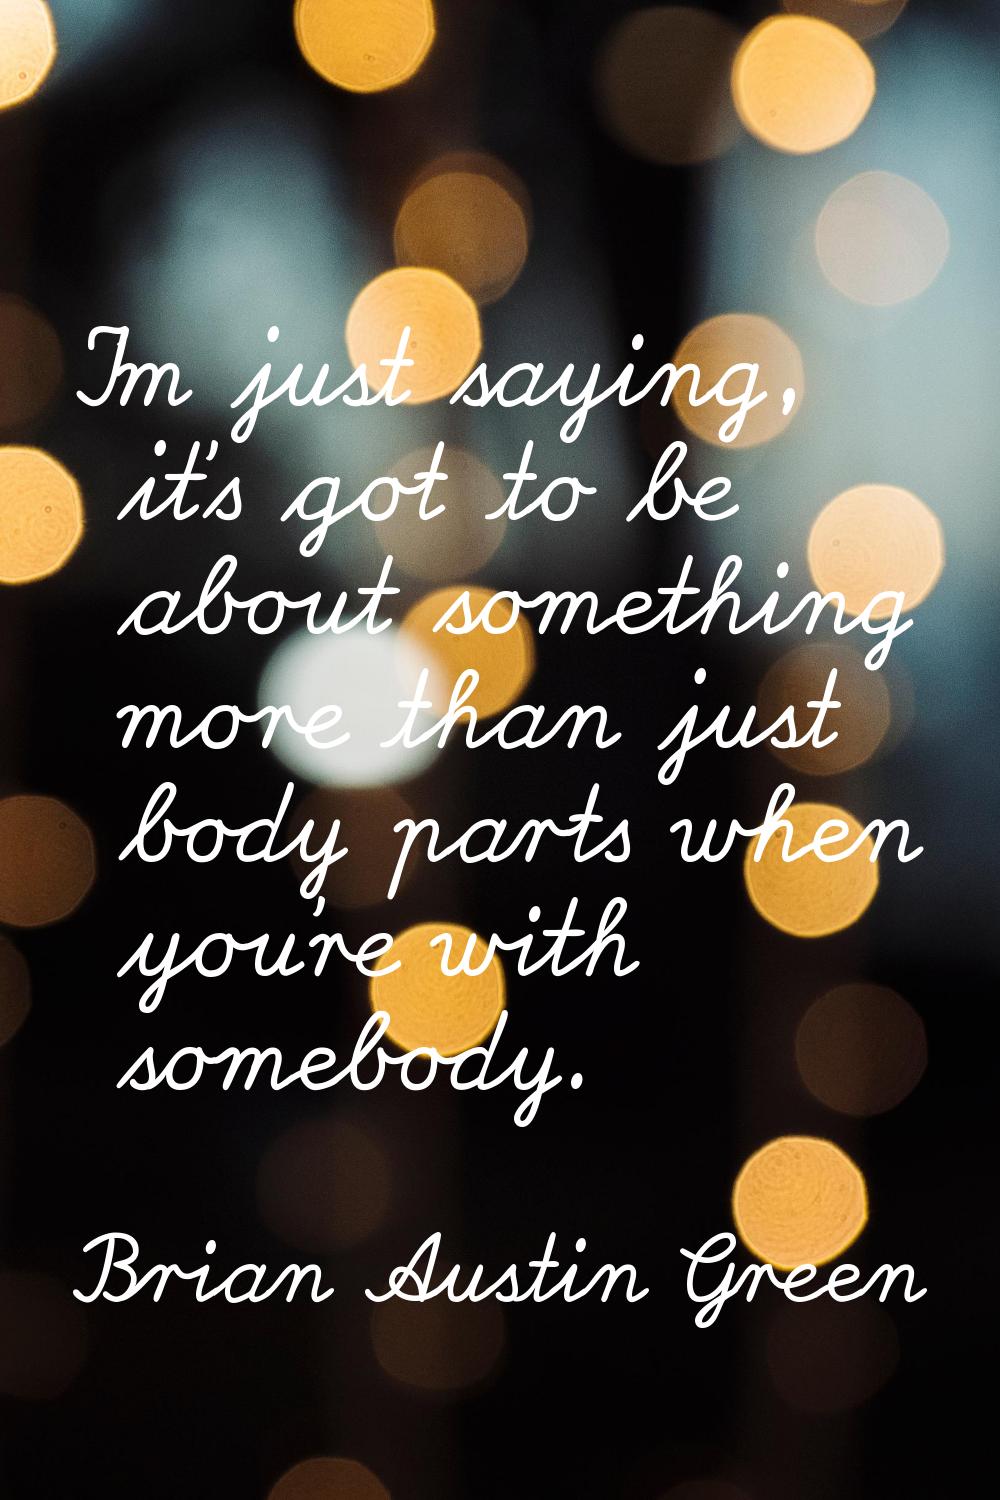 I'm just saying, it's got to be about something more than just body parts when you're with somebody